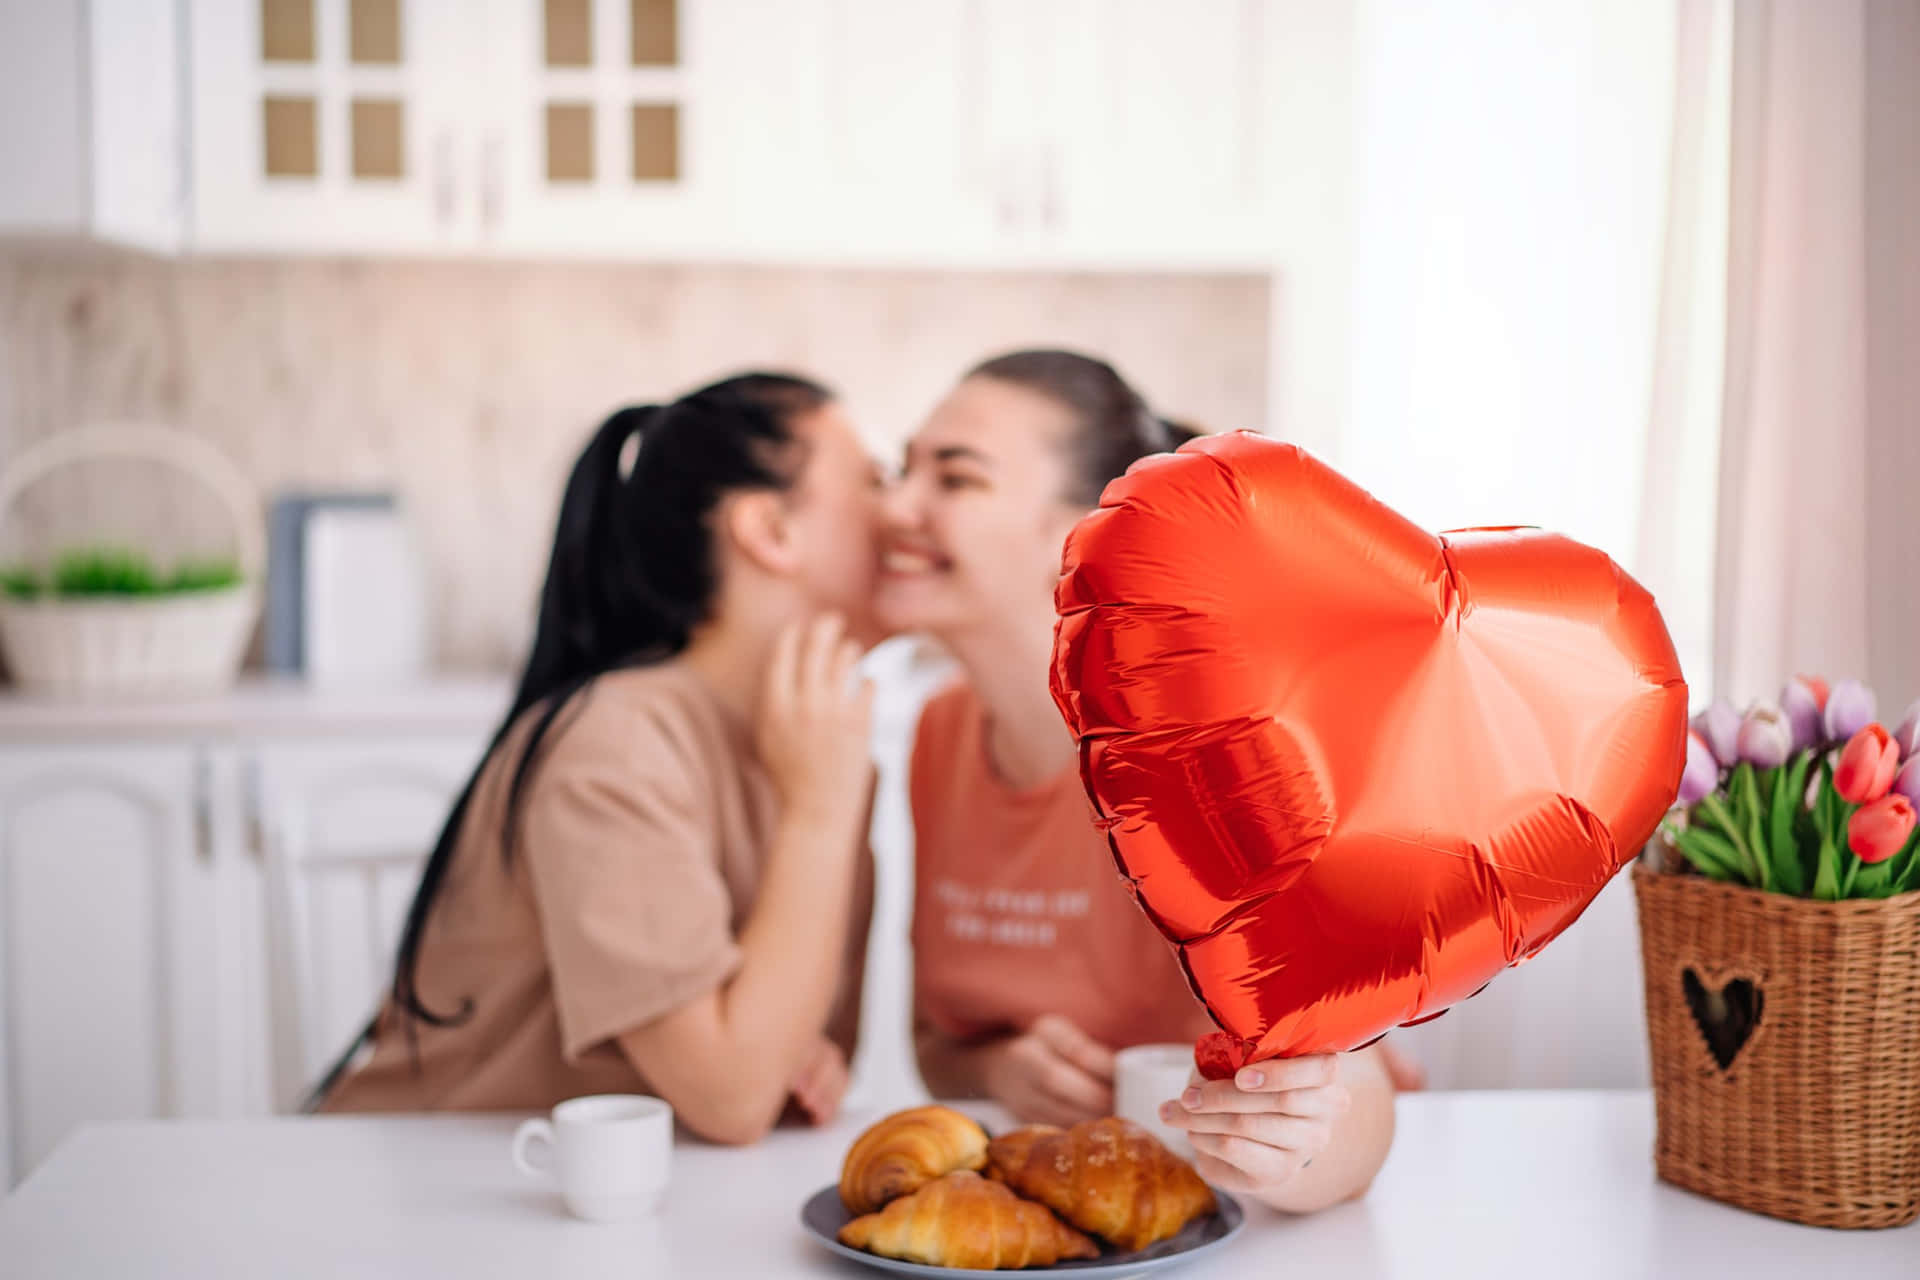 Two Girls With Valentine's Day Balloon Pictures